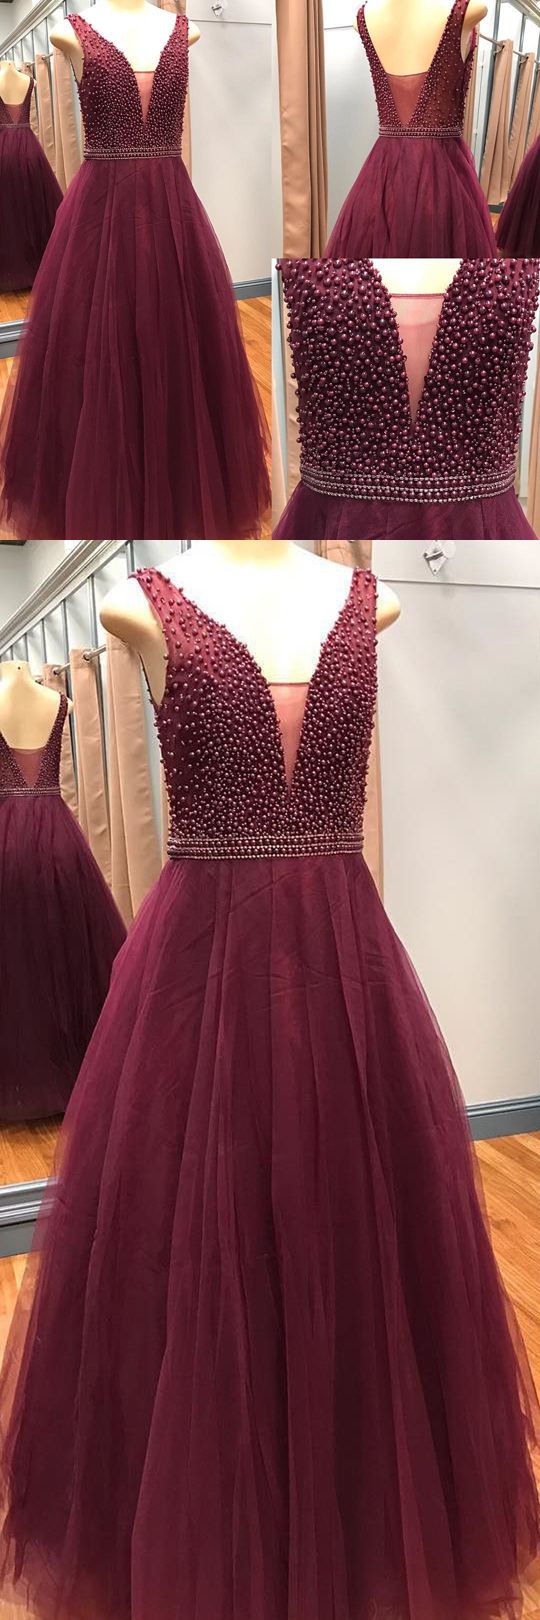 Sexy Pearls Long Prom Dresses,burgundy Tulle Prom Dresses ,v-neck Evening Dresses,,wedding Party Gowns ,floor Length Evening Dress, Women Pageant